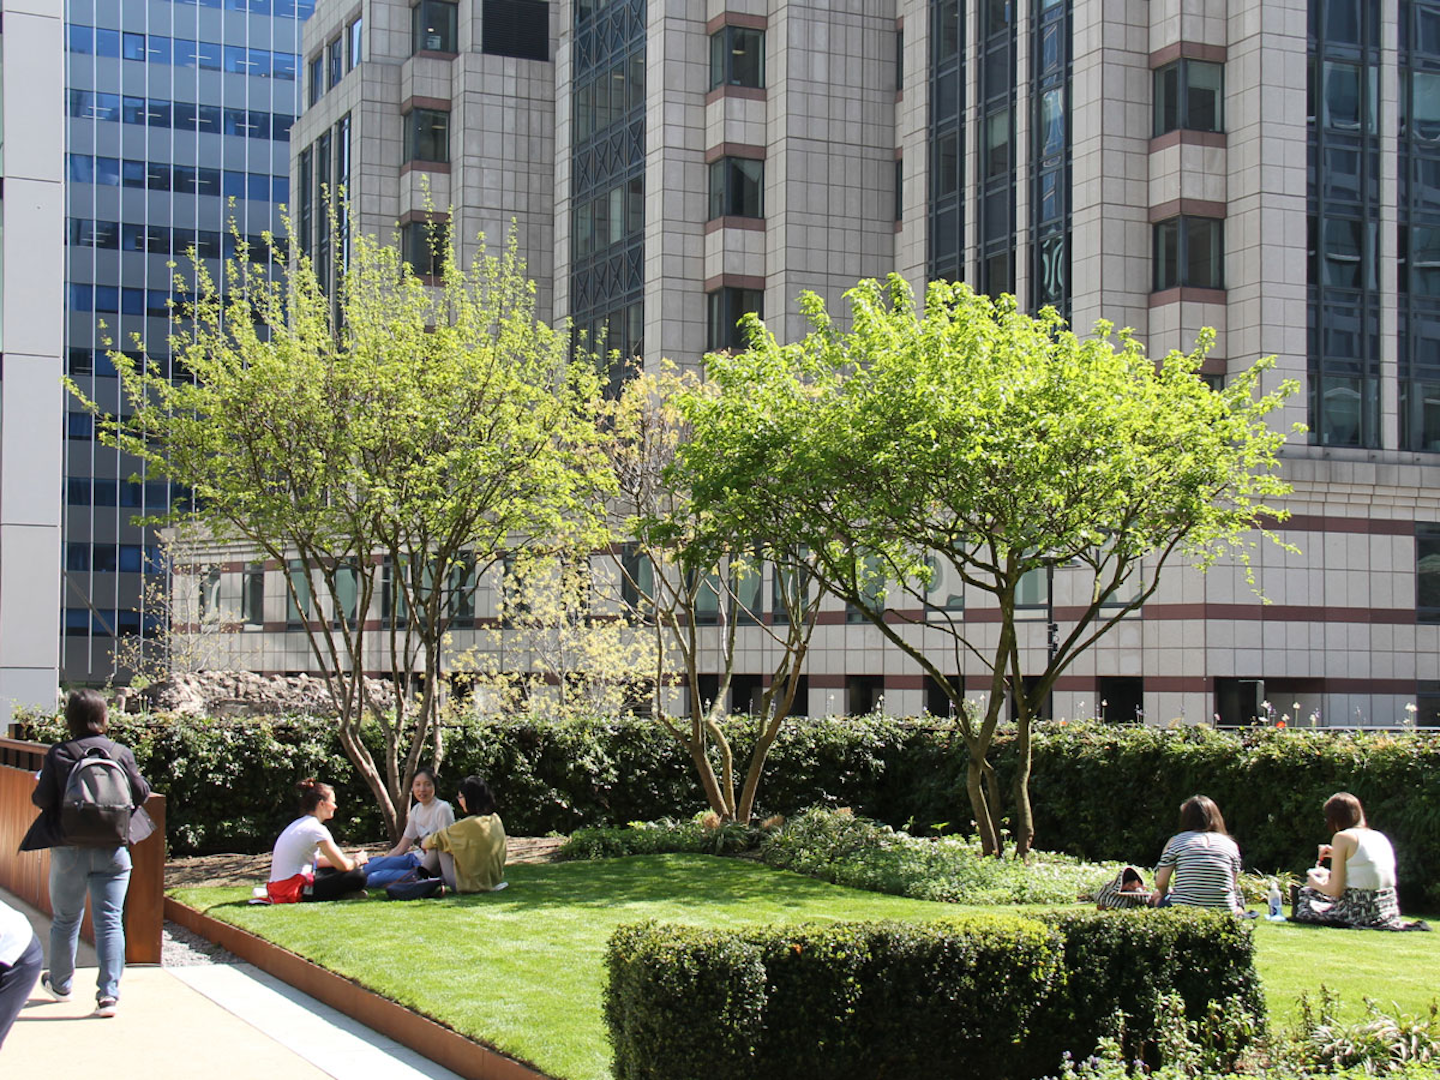 People sitting and relaxing on a living roof in the city